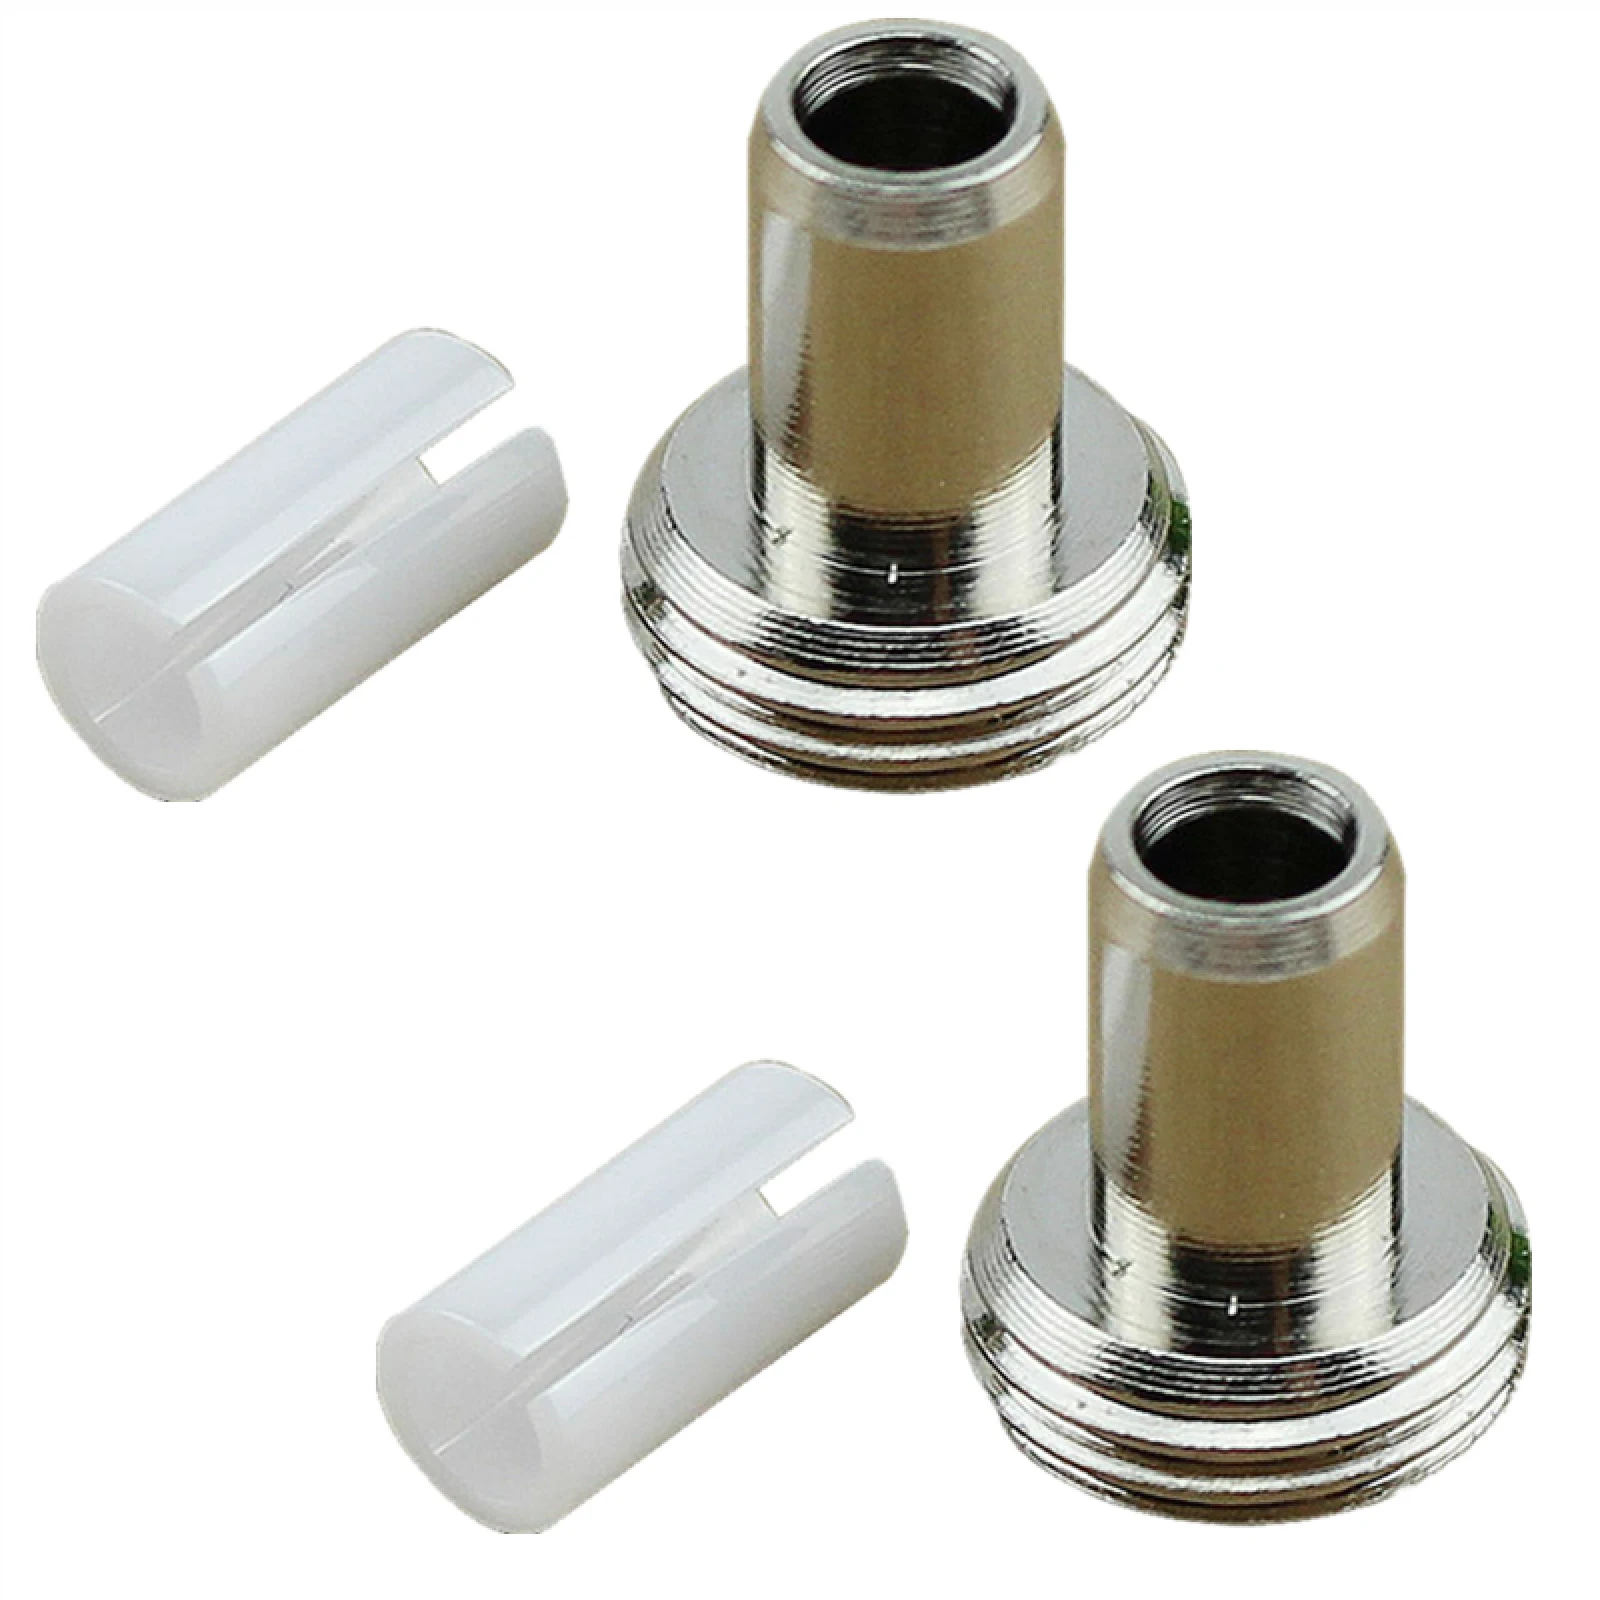  Head Fitting &amp; 7mm Ceic  Sleeve Connector Adapters For  Optic Cable Tester Visu - £29.95 GBP